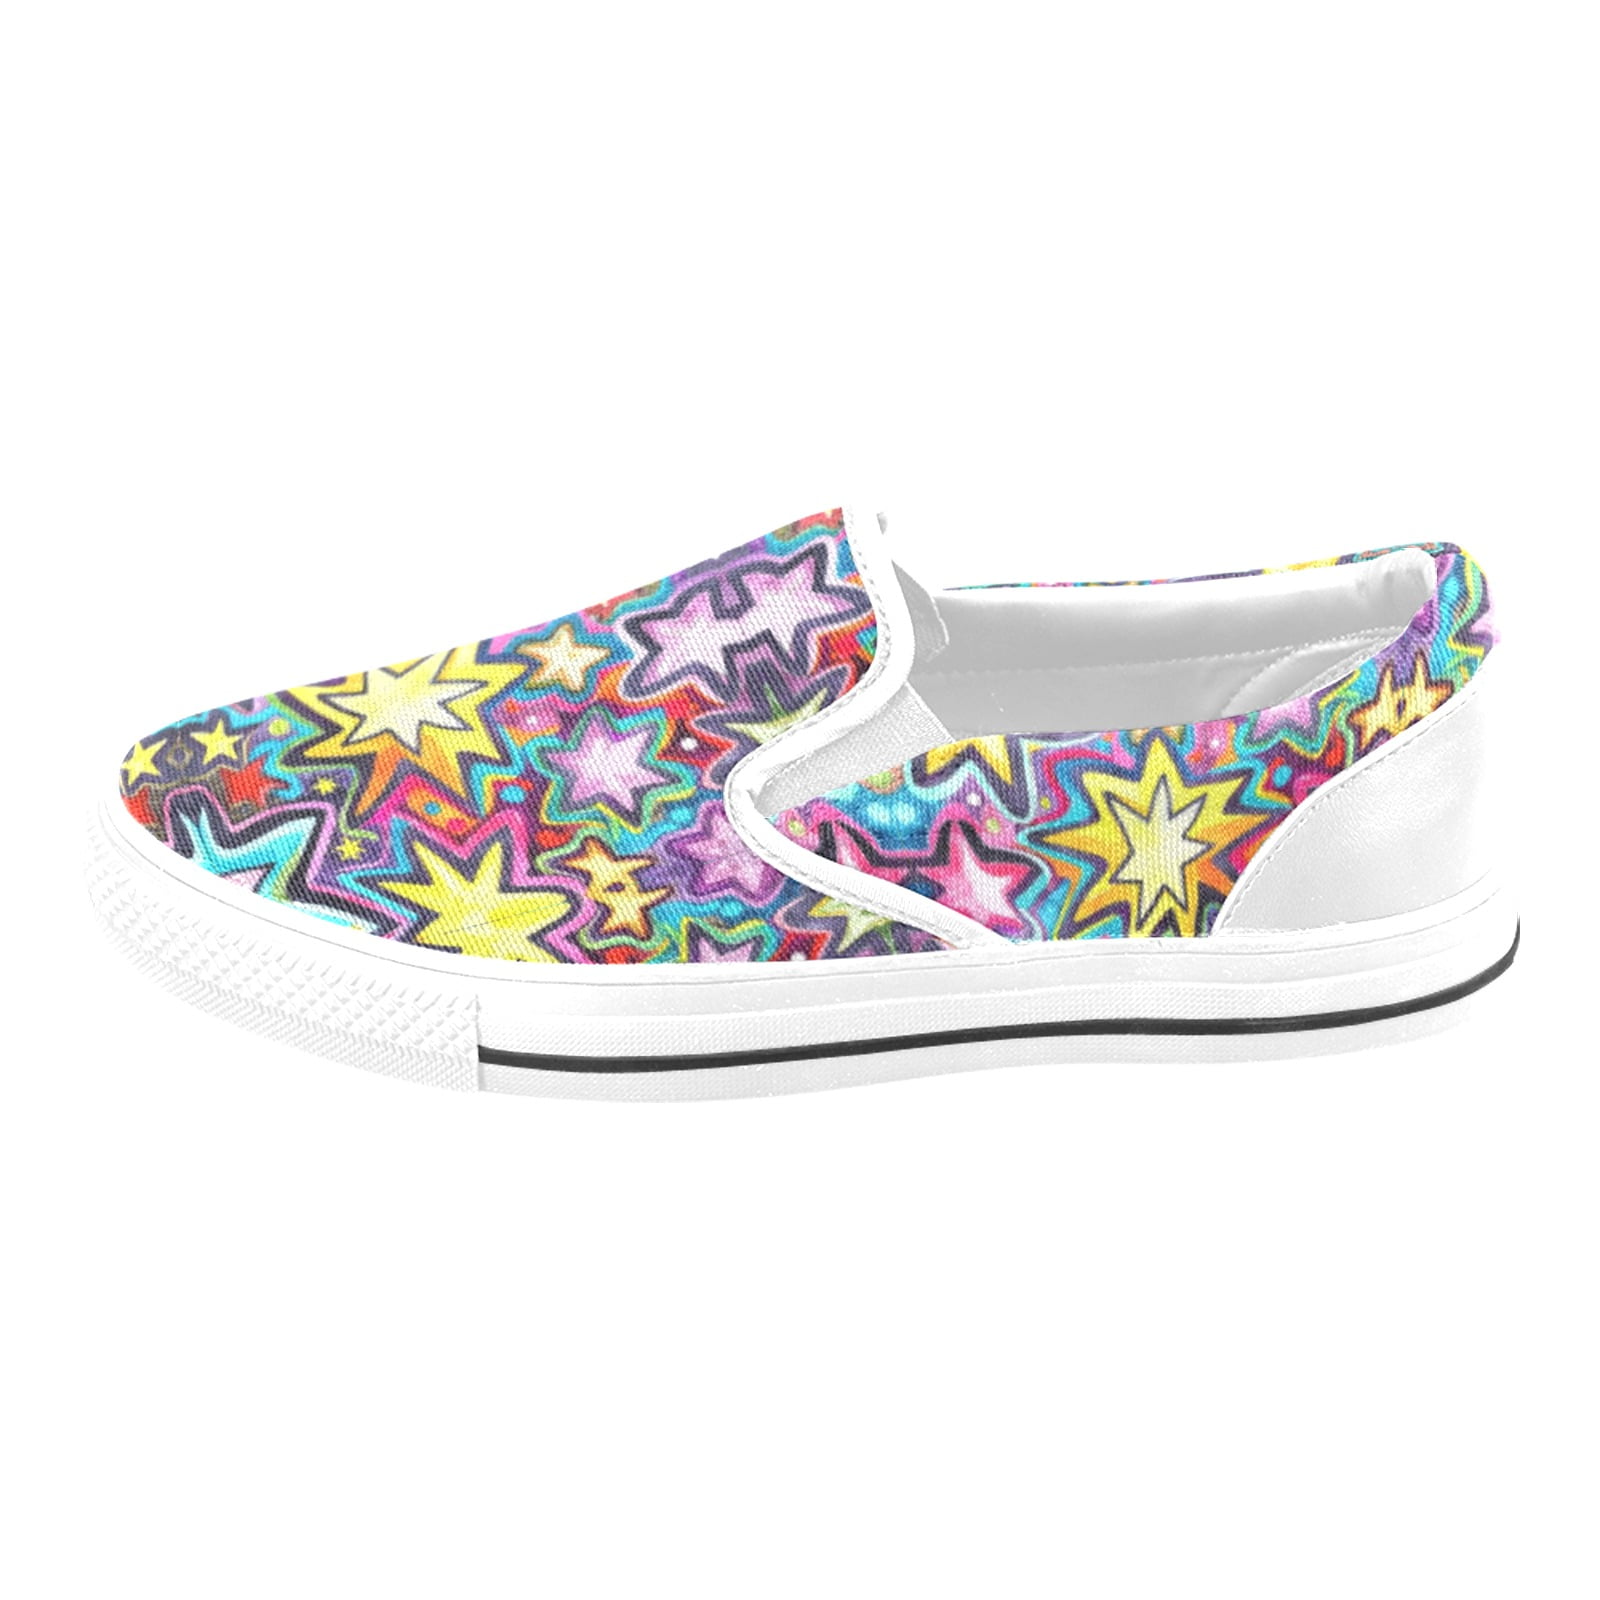 Mens Slip On Shoes Funky Stars=3 Women's Fashion Art Casual Canvas ...